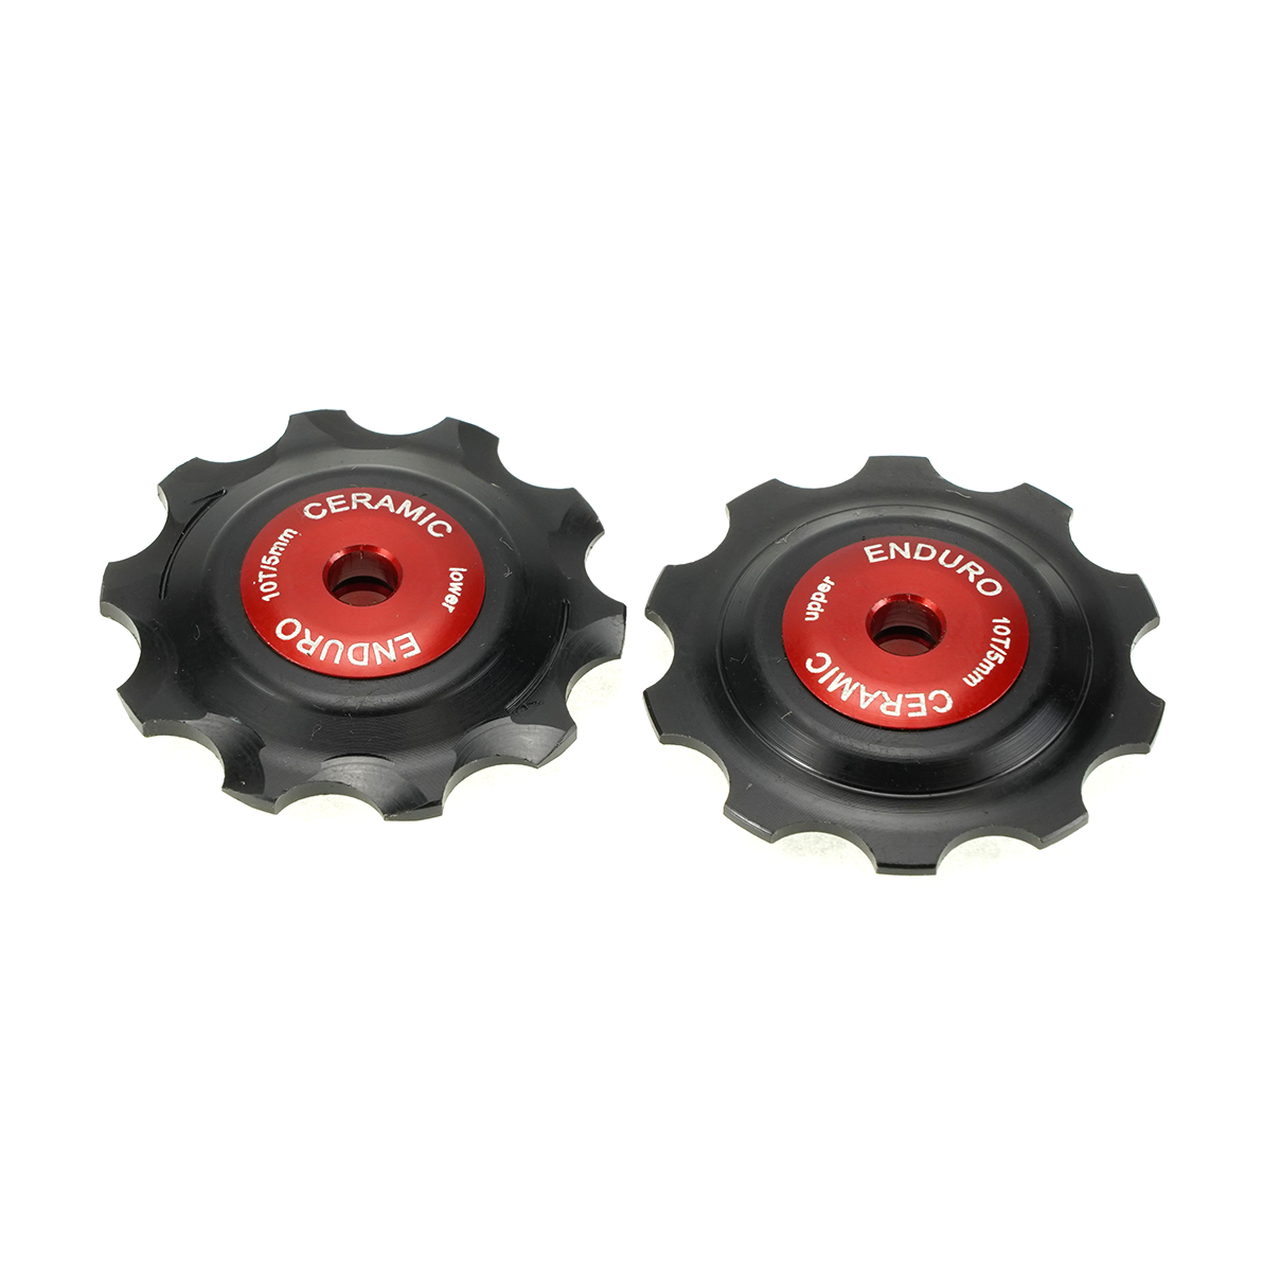 BKCJ-0000 - 10 tooth, Ceramic Hybrid Bearing, Machined Delrin Derailleur Pulleys for Campagnolo Derailleurs (5mm bolt)